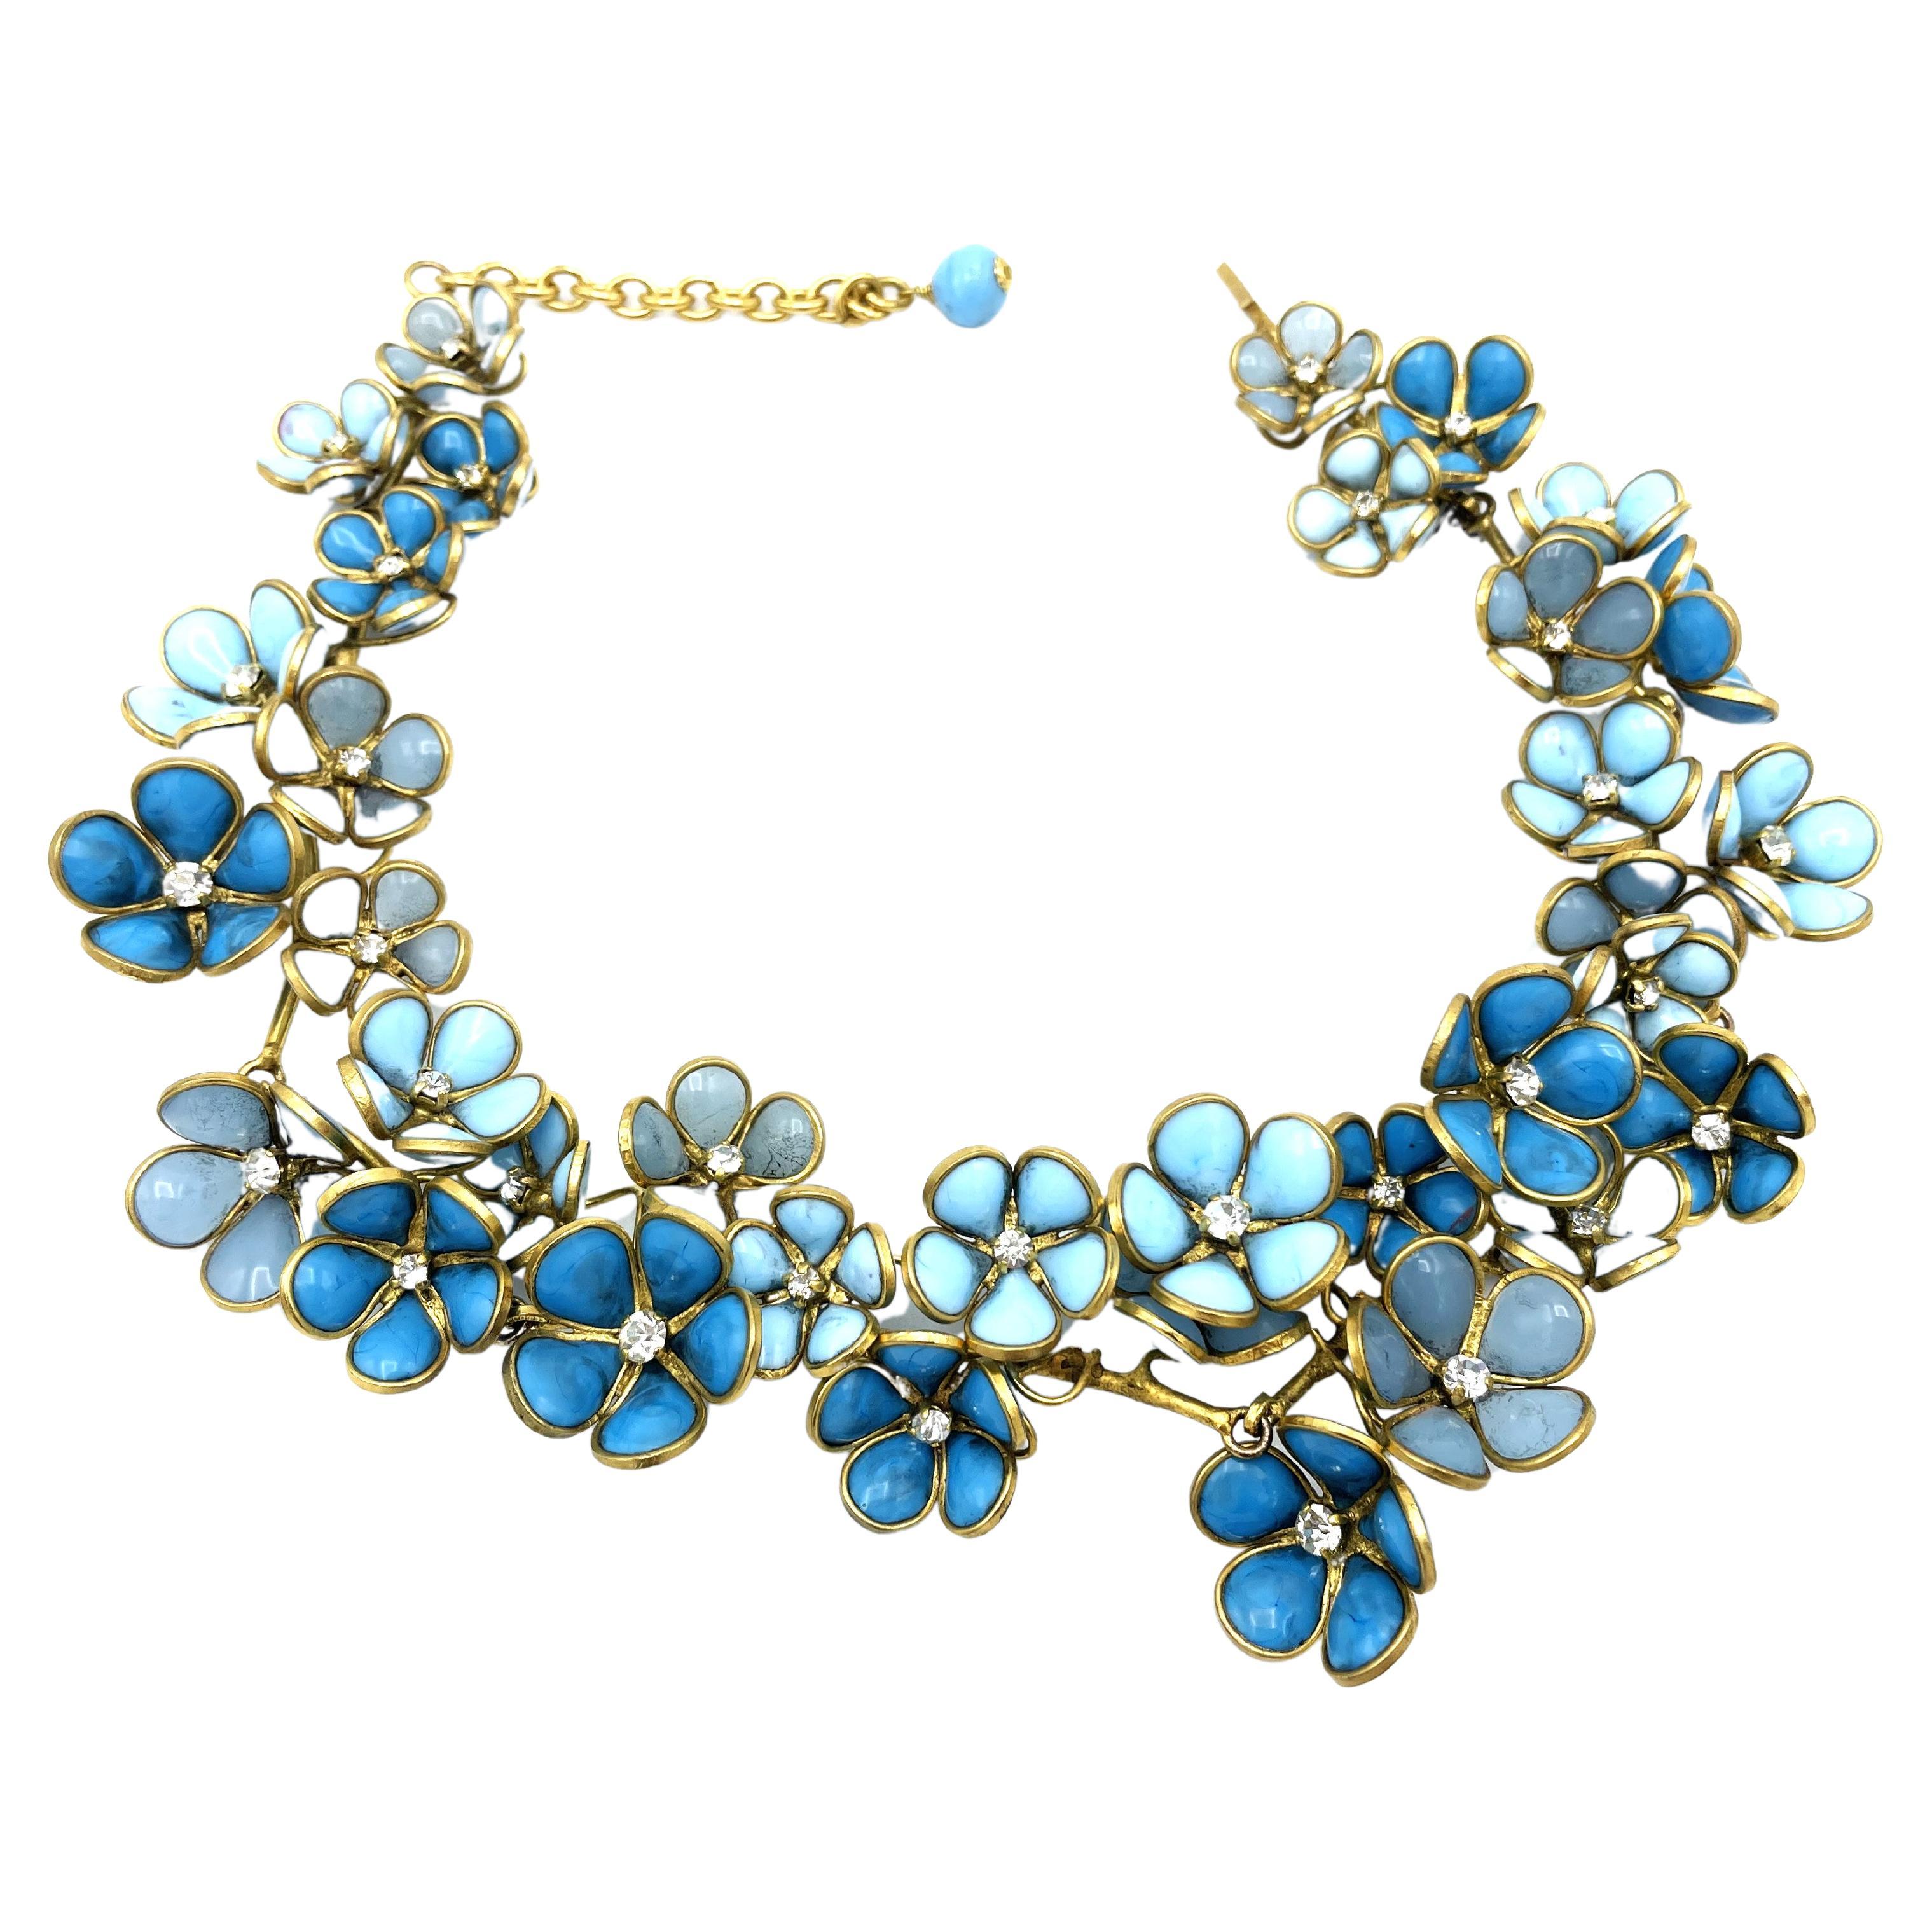 Modern Necklace of many blue glass flowers from Gripoix in the style of Chanel For Sale